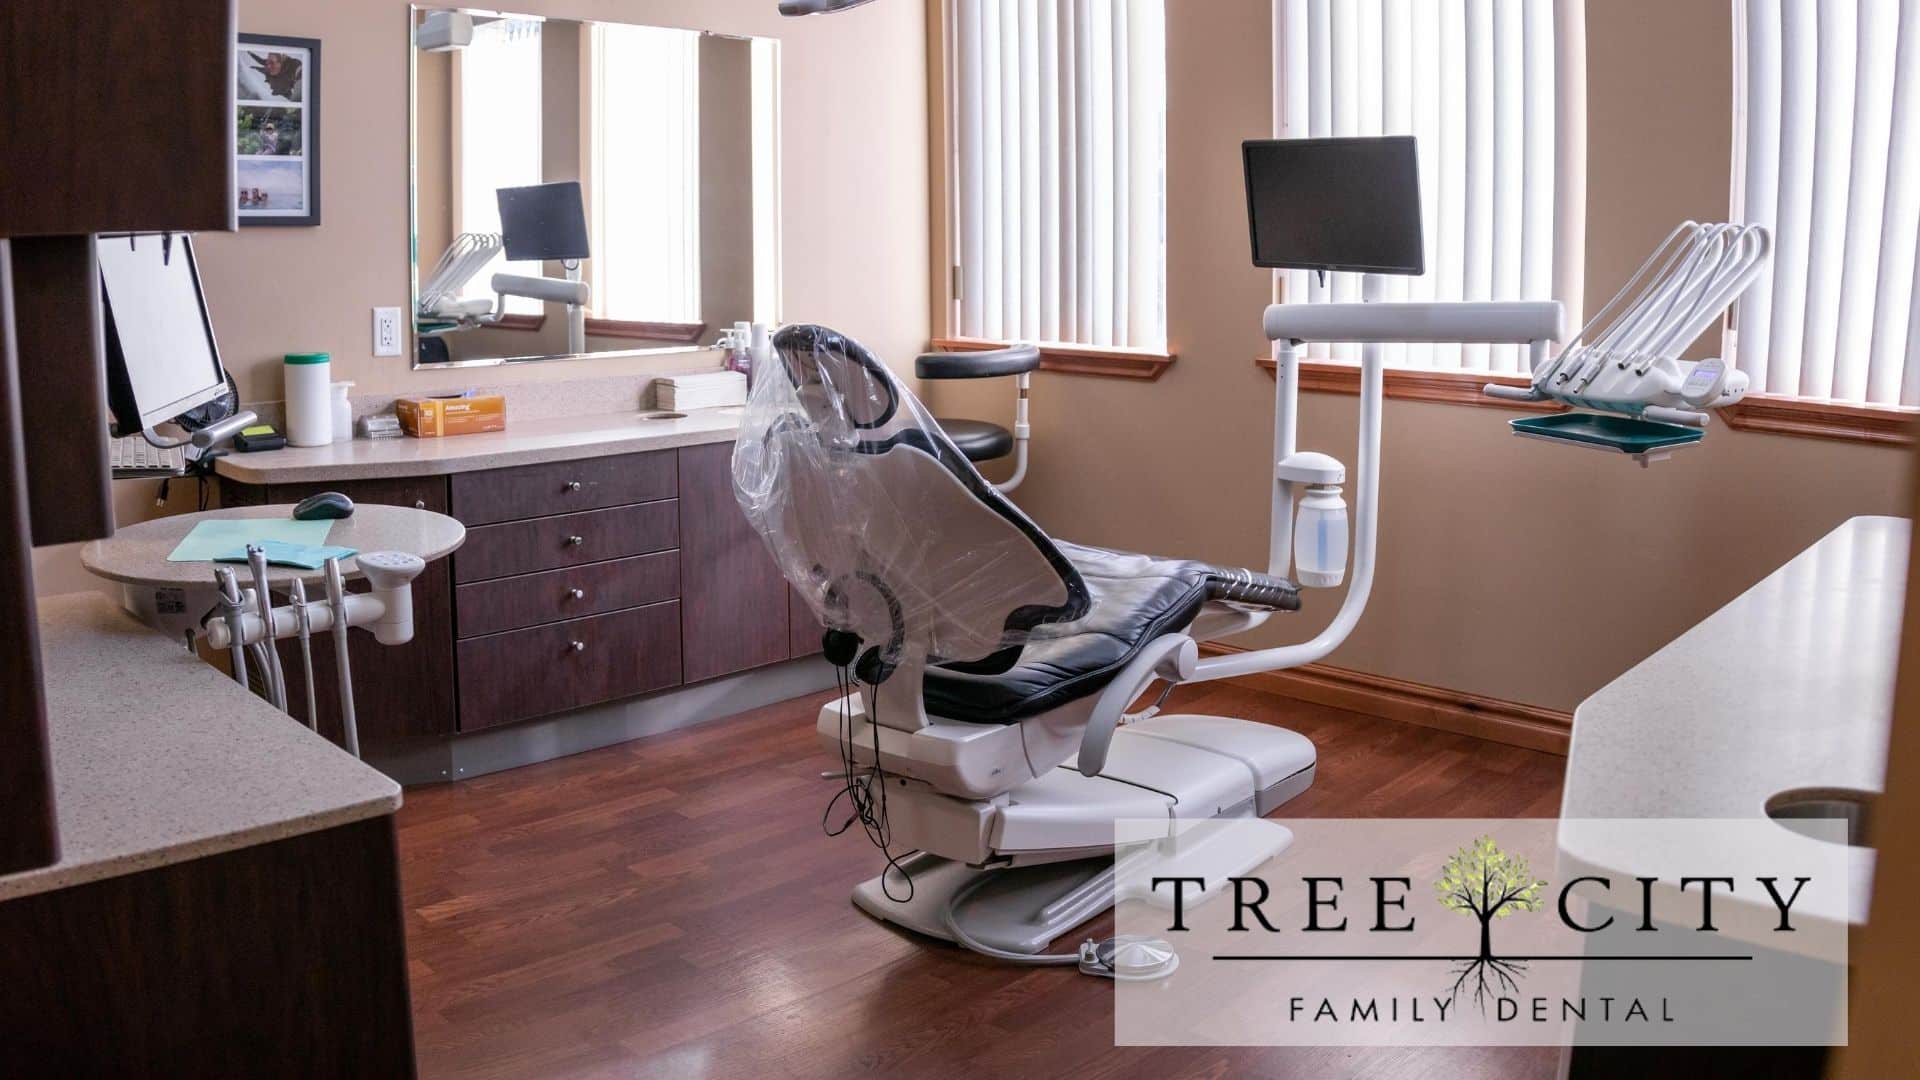 One of Tree City’s patient rooms